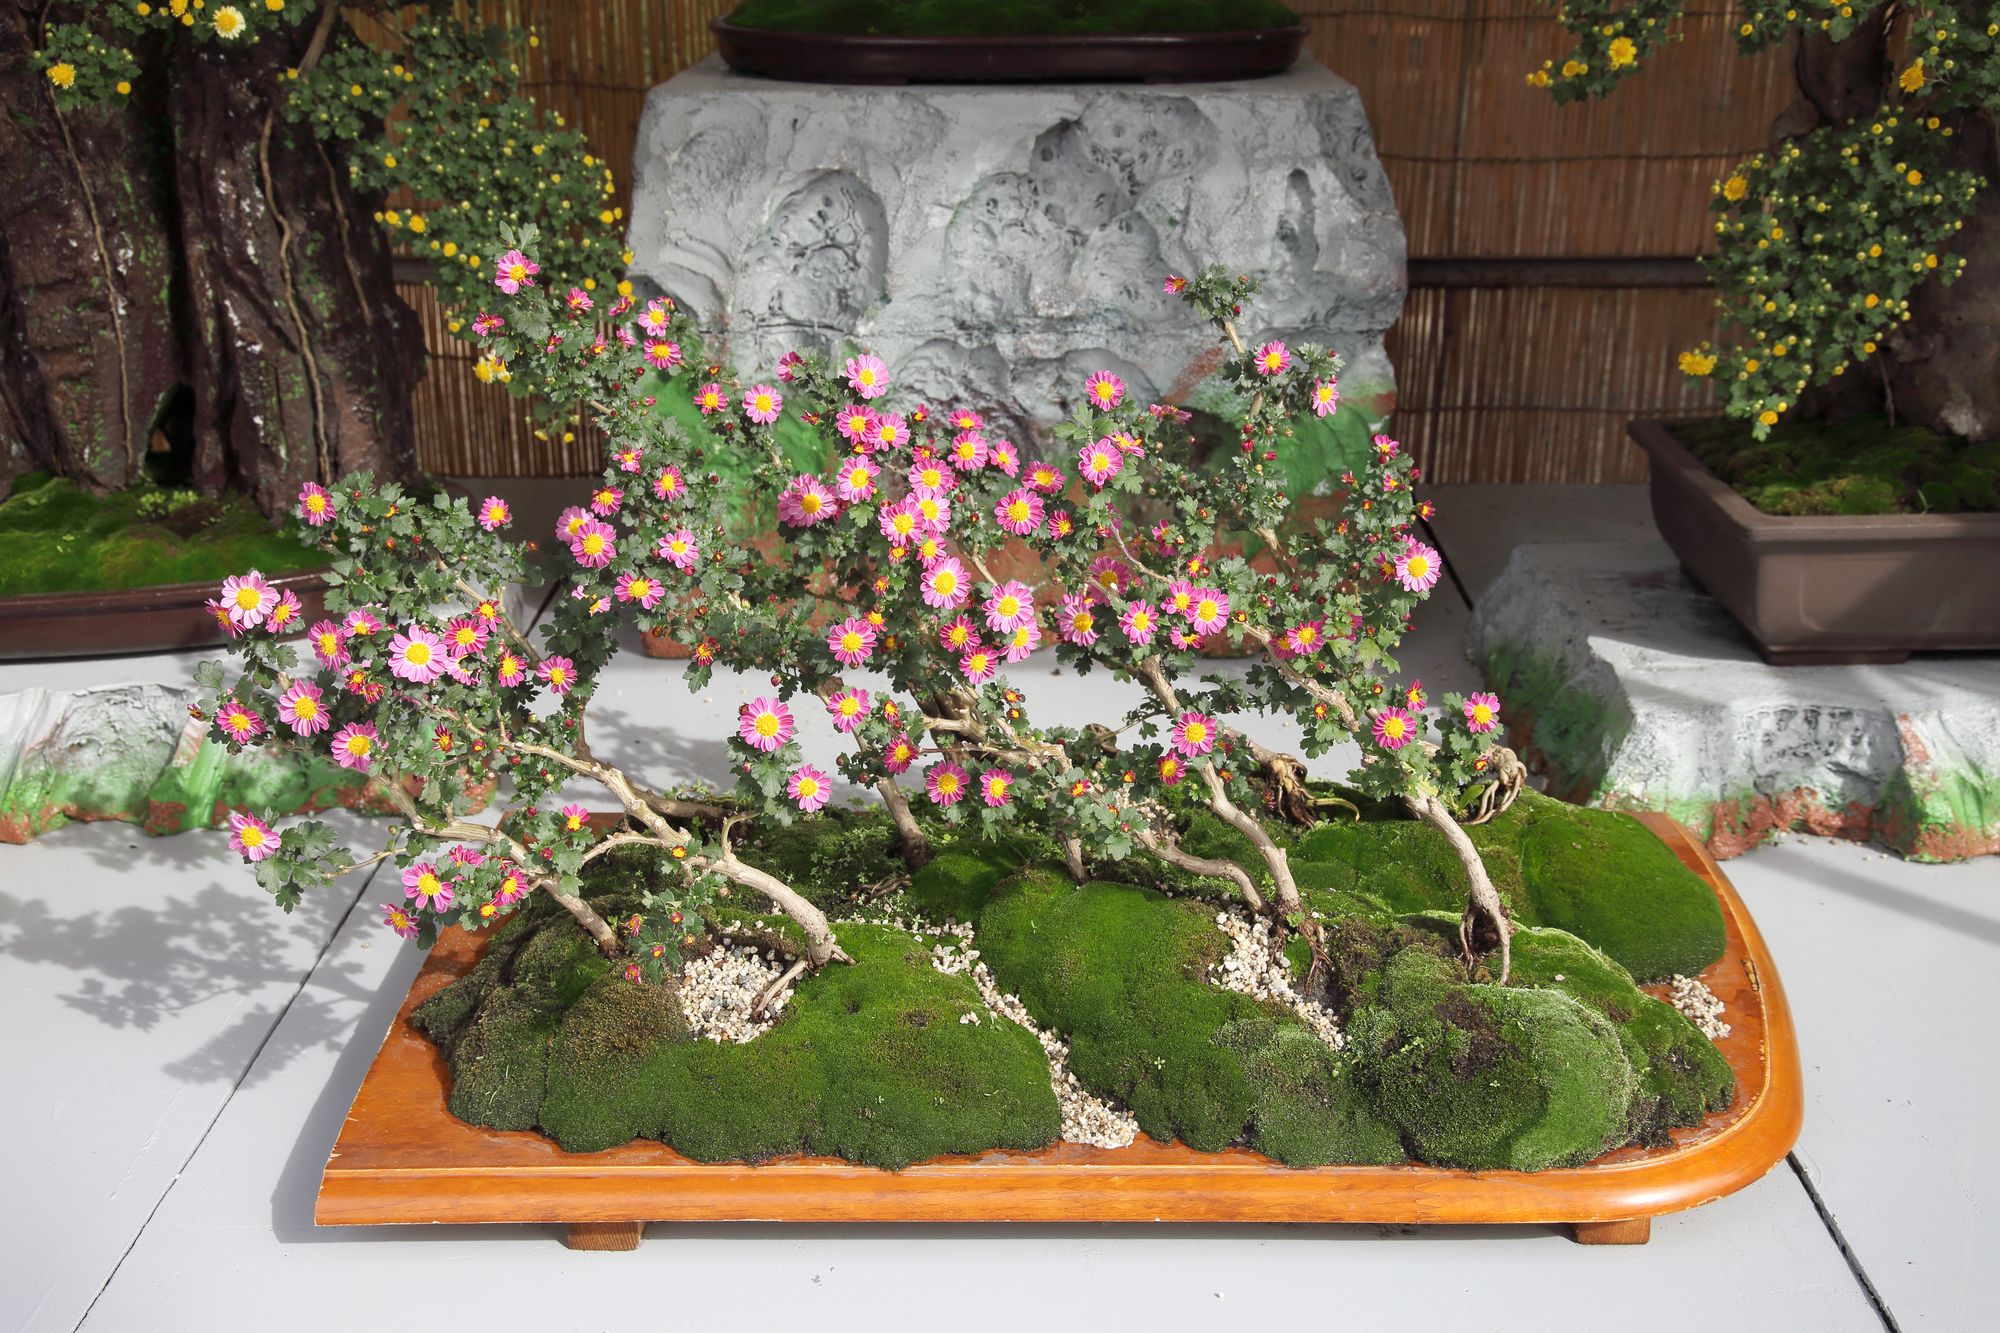 Several flowering bonsai with slant trunks situated in a wooden platform with two flowering bonsai on the background